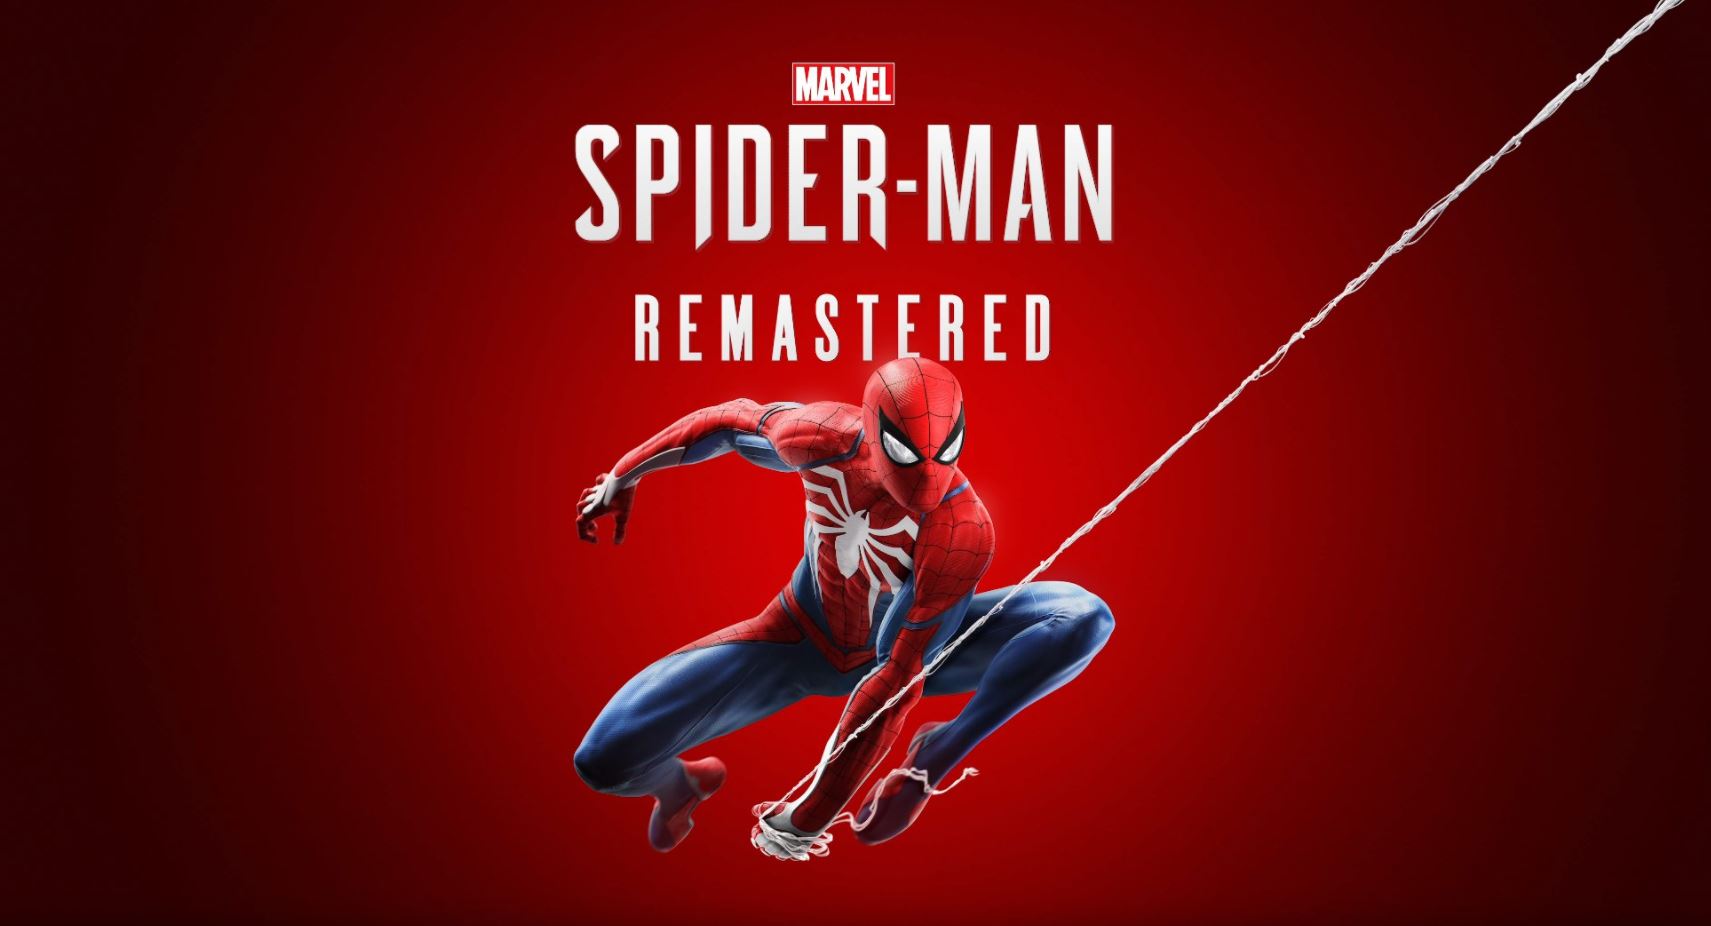 Marvel's Spider-Man: Remastered Review (PS5) - PlayStation Universe